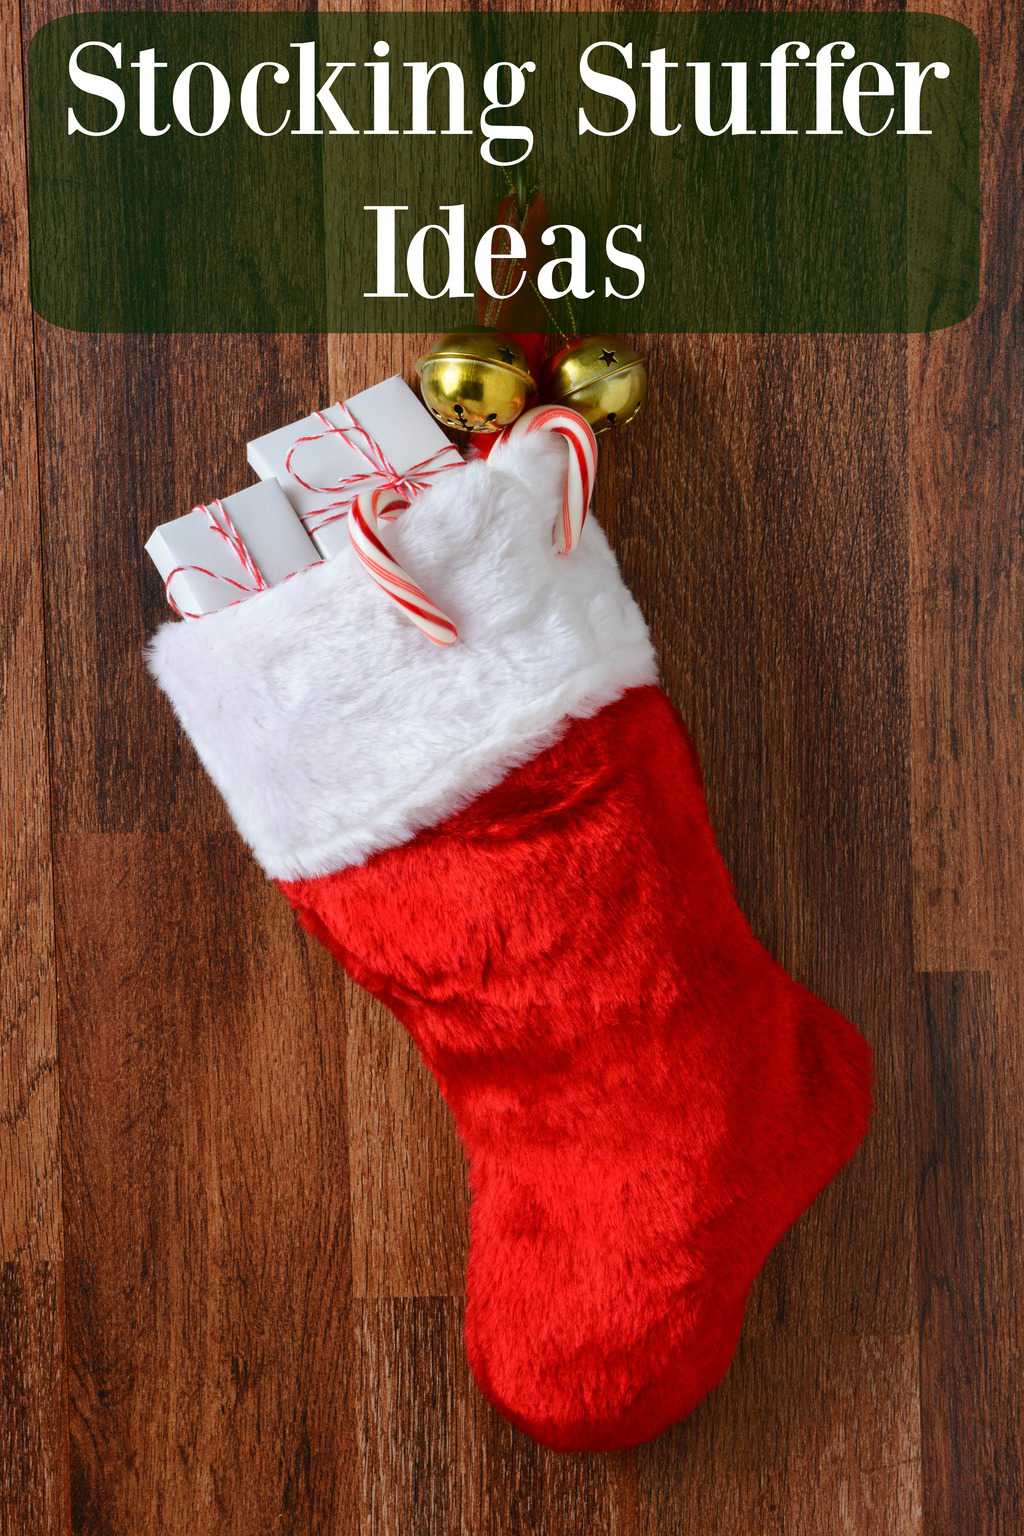 Must Have Stocking Stuffers for the Men in Your Life  Husband stocking  stuffers, Diy gifts for men, Stocking stuffers for men